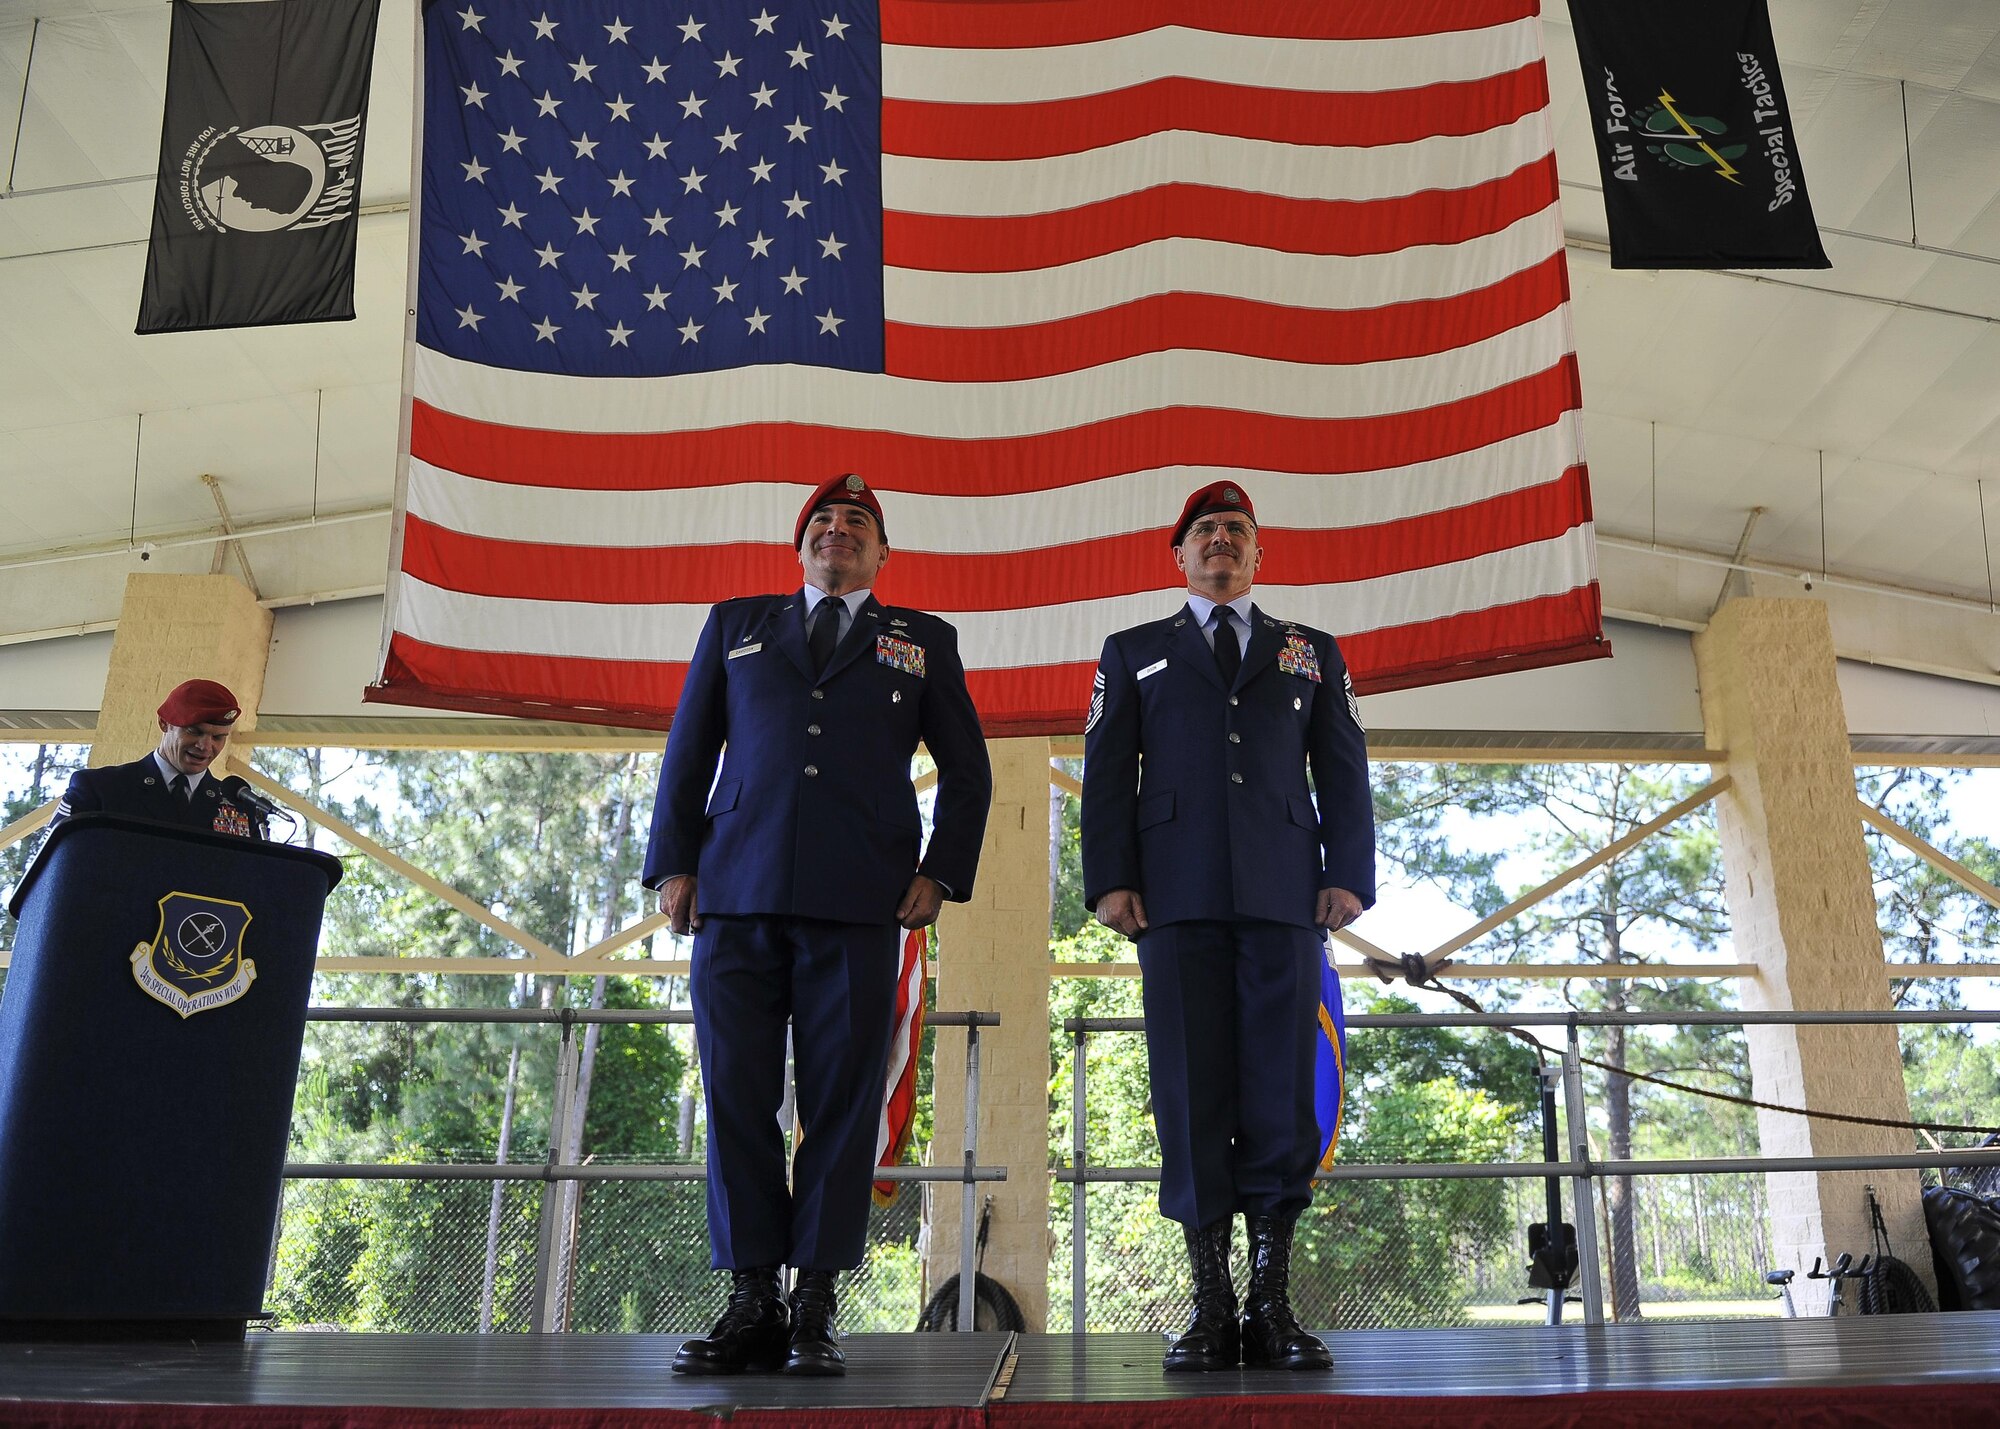 Col. Matthew Davidson, the commander of the 24th Special Operations Wing, and Chief Master Sgt. Bruce Dixon, the command chief master sergeant of the 24th SOW, stand at attention during the reading of Dixon's Legion of Merit Medal citation during his retirement ceremony at Hurlburt Field, Fla., May 13, 2016. Dixon served 30 years as a combat controller, earning the title of master parachutist with more than 400 military jumps including three combat jumps in Afghanistan. In total, he spent ten of those thirty years away from his family, consistently serving his nation's call in dangerous ground combat and training. (U.S. Air Force photo by Airman 1st Class Kai White)